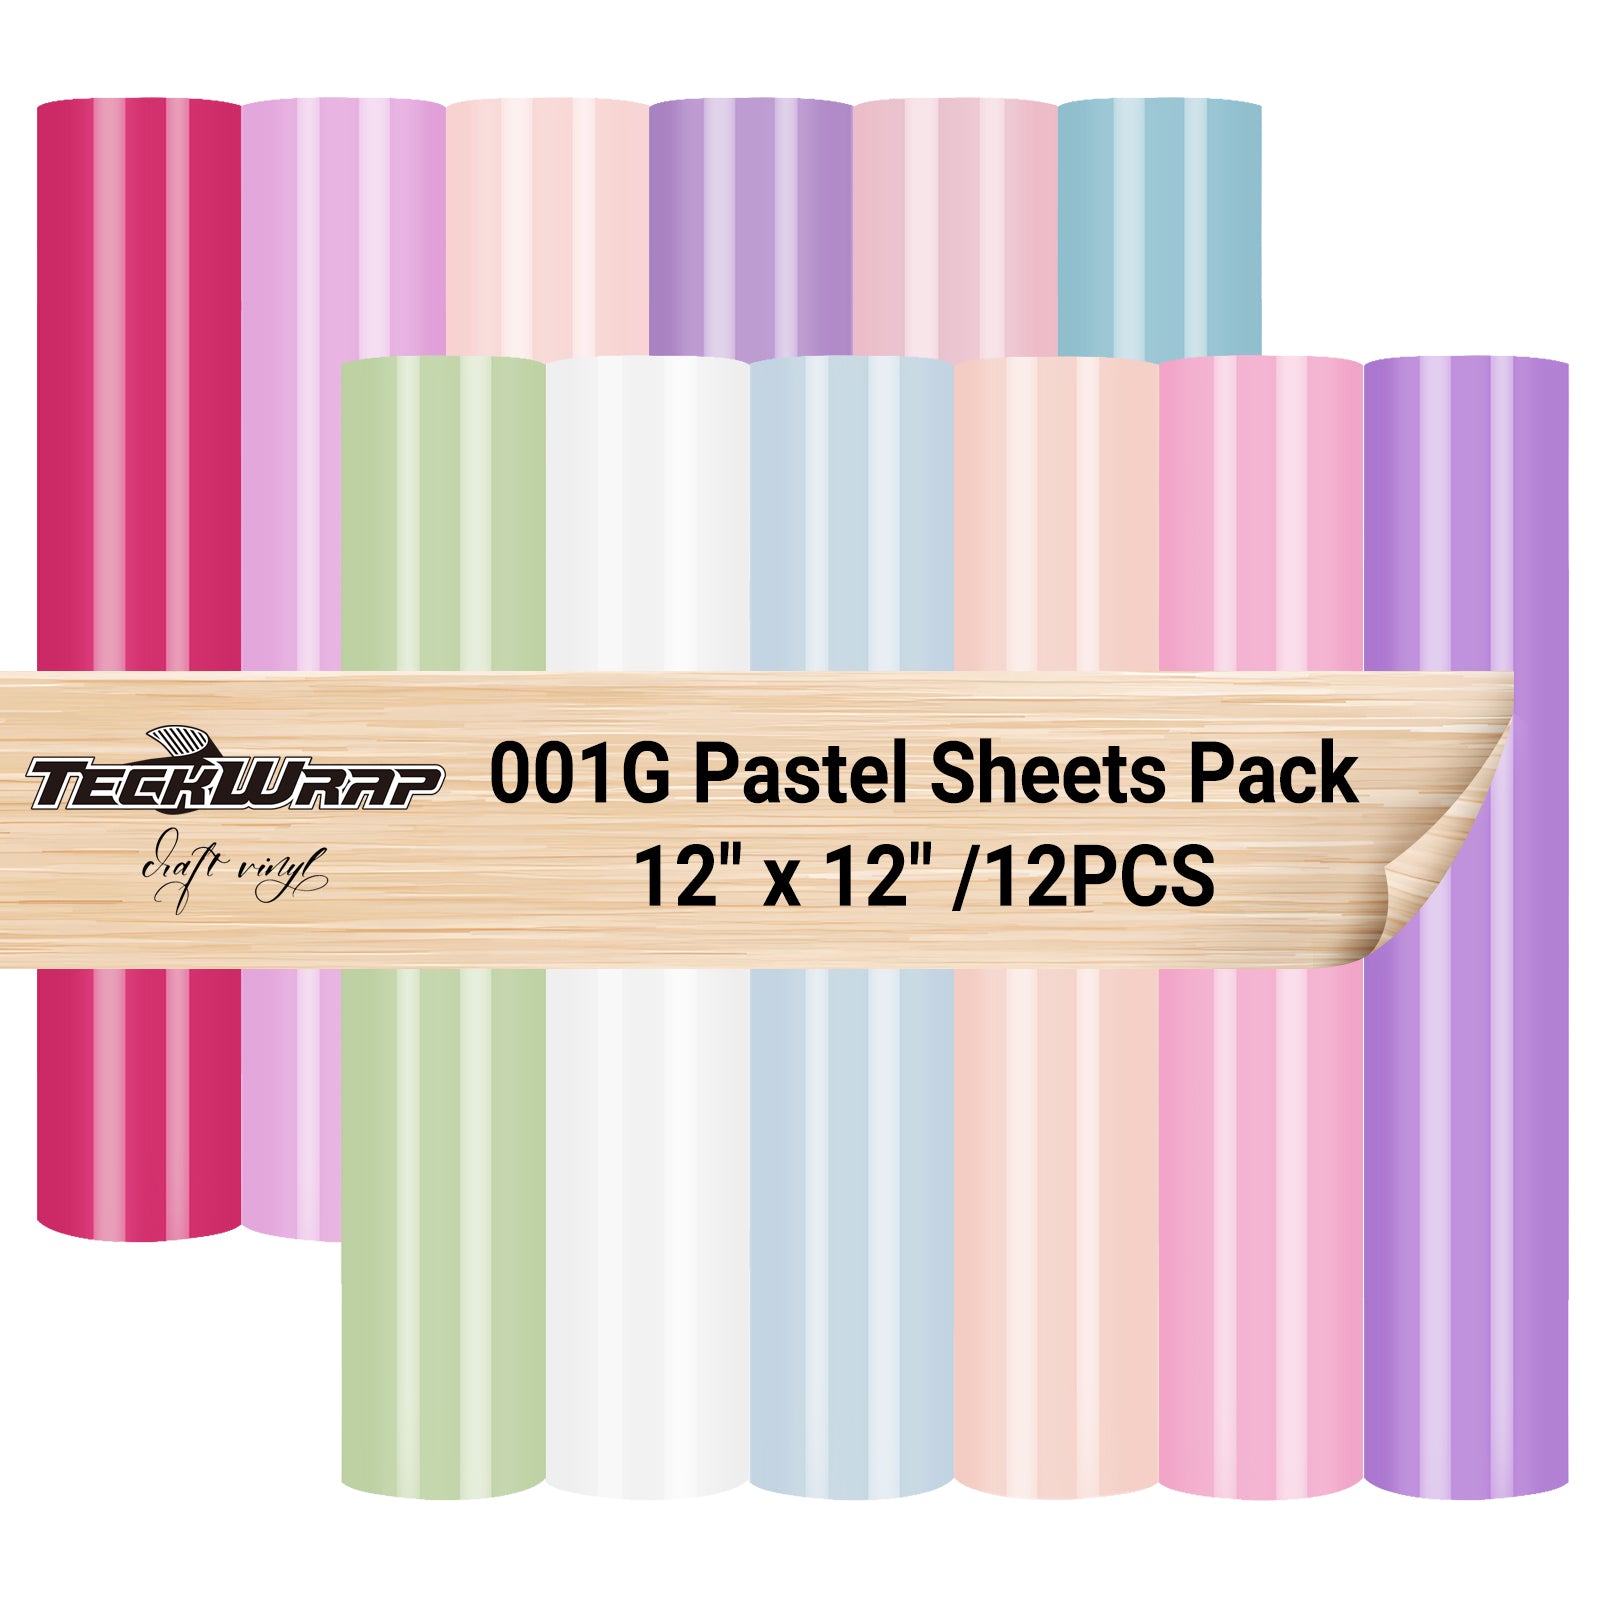 001 Series Pastel Color Sheets Pack